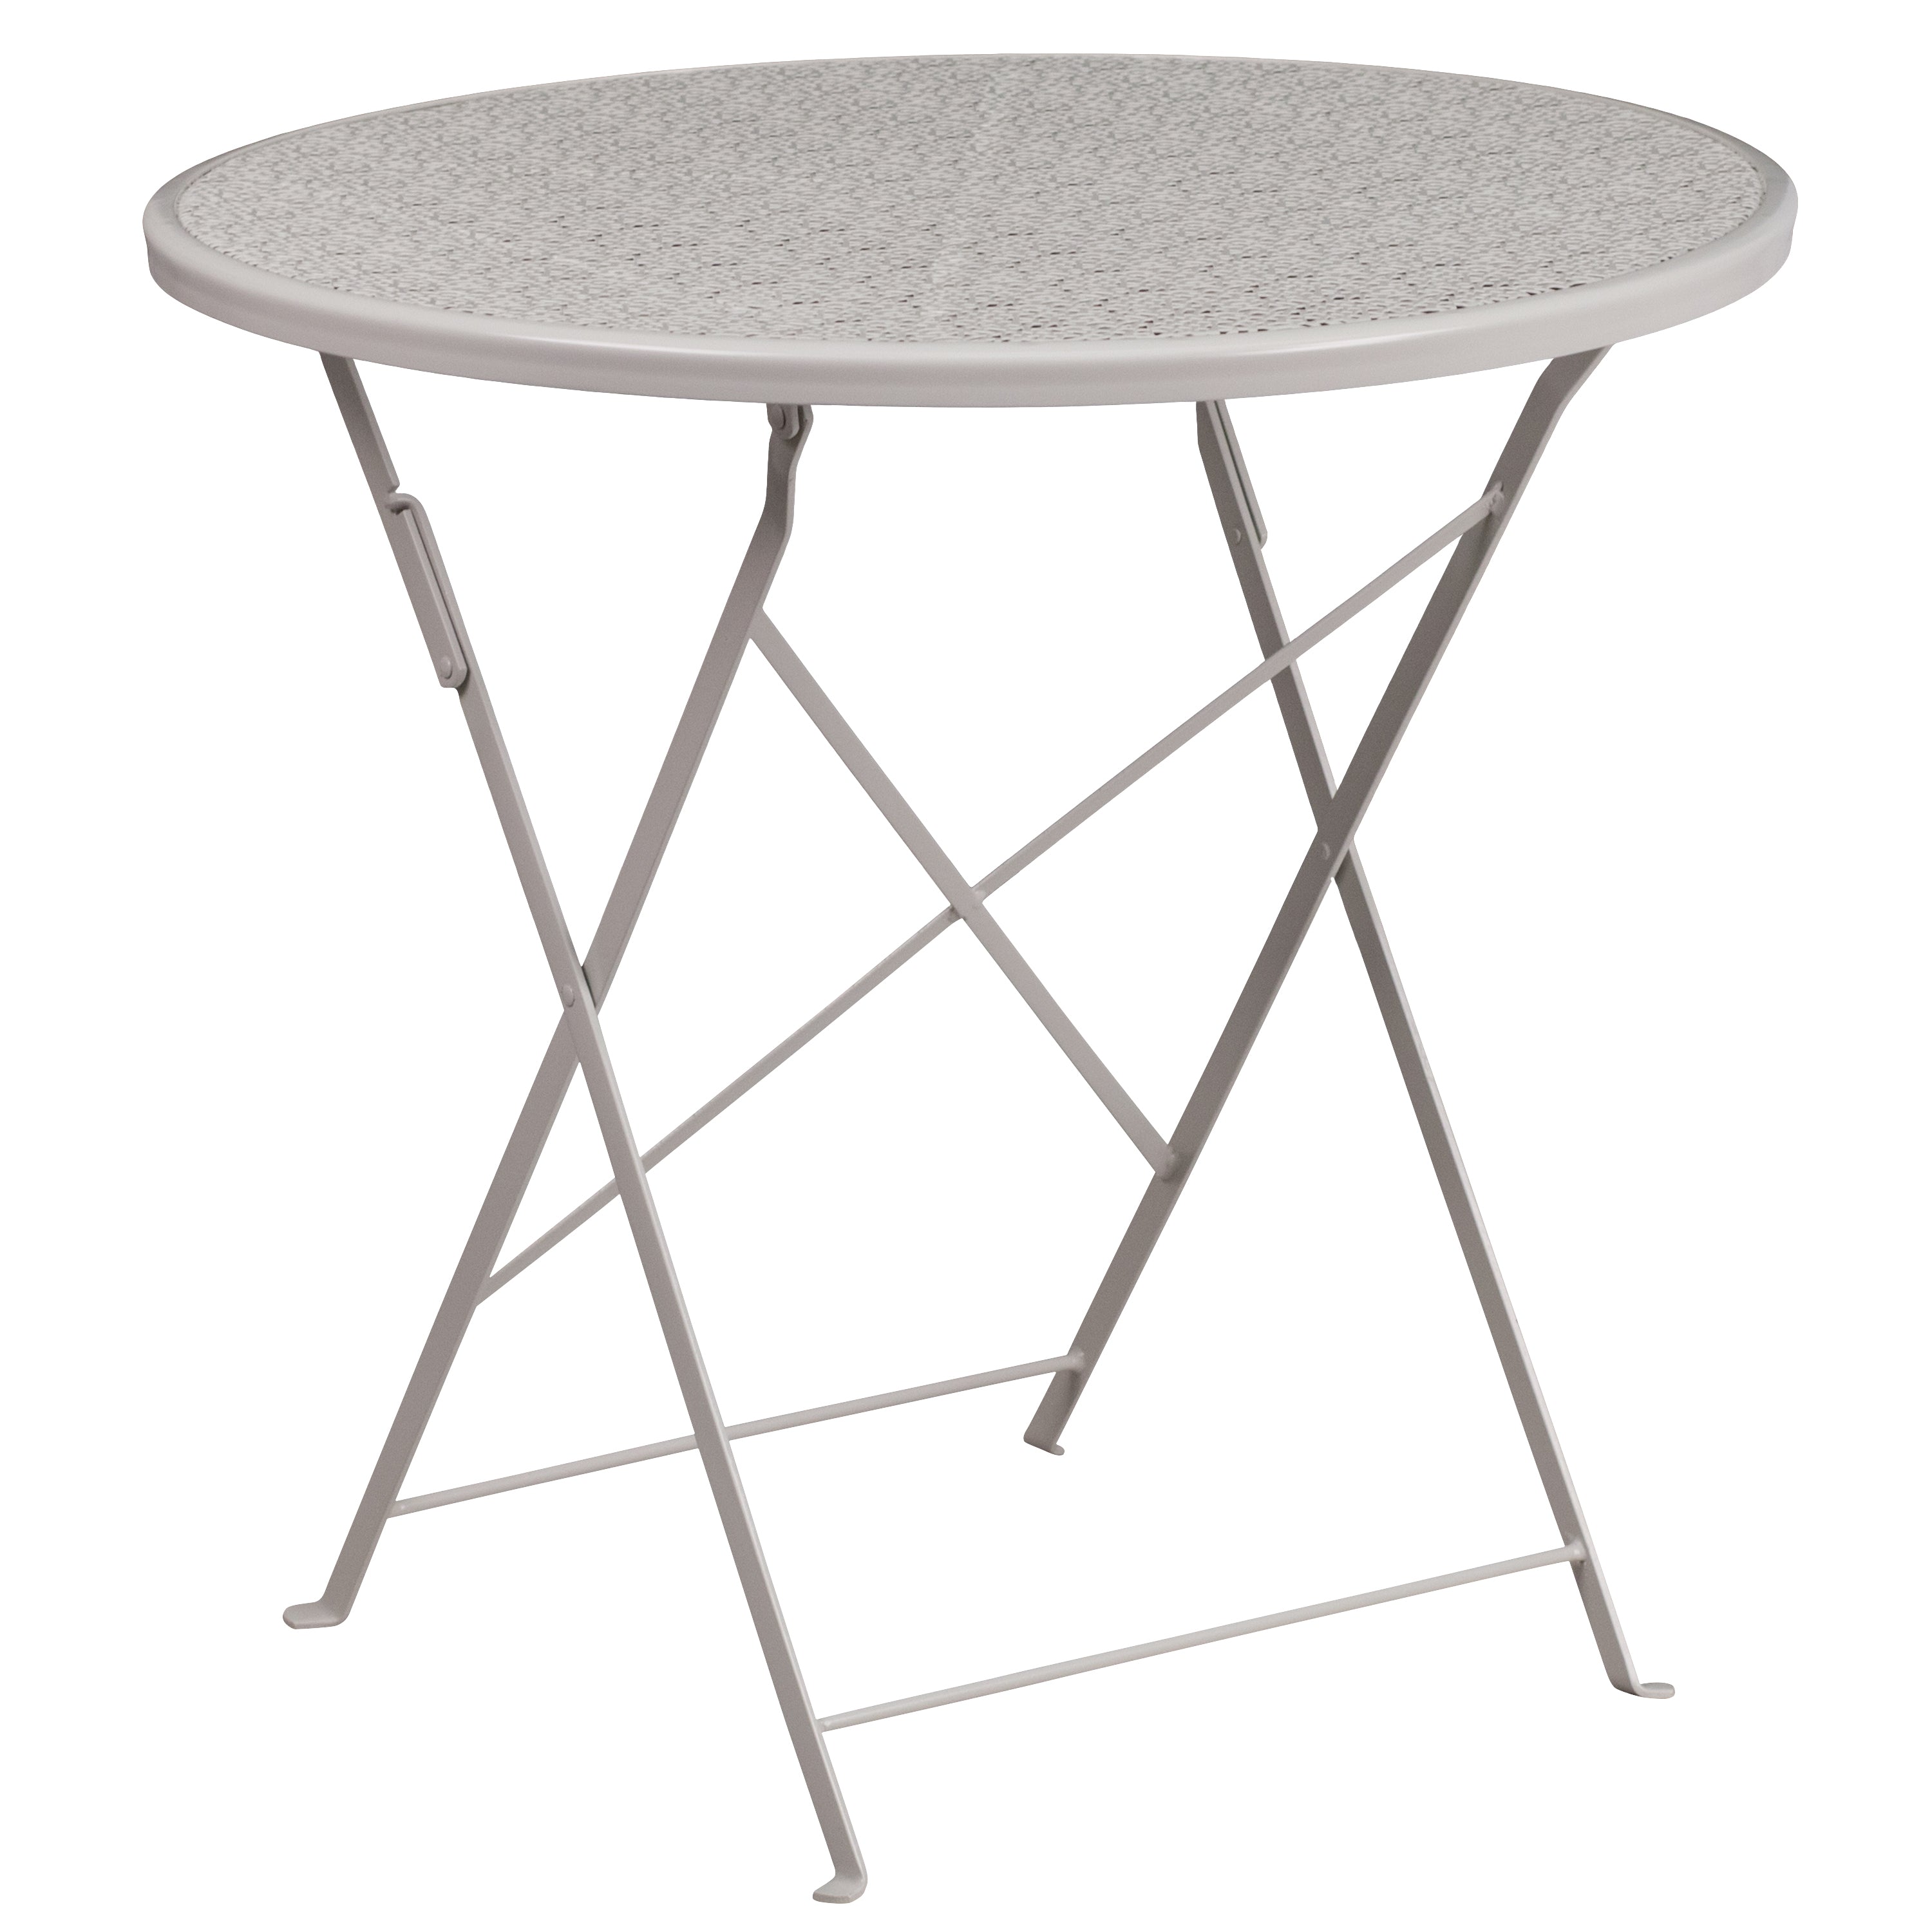 Oia Commercial Grade 30" Round Indoor-Outdoor Steel Folding Patio Table Set with 2 Square Back Chairs-Indoor/Outdoor Dining Sets-Flash Furniture-Wall2Wall Furnishings